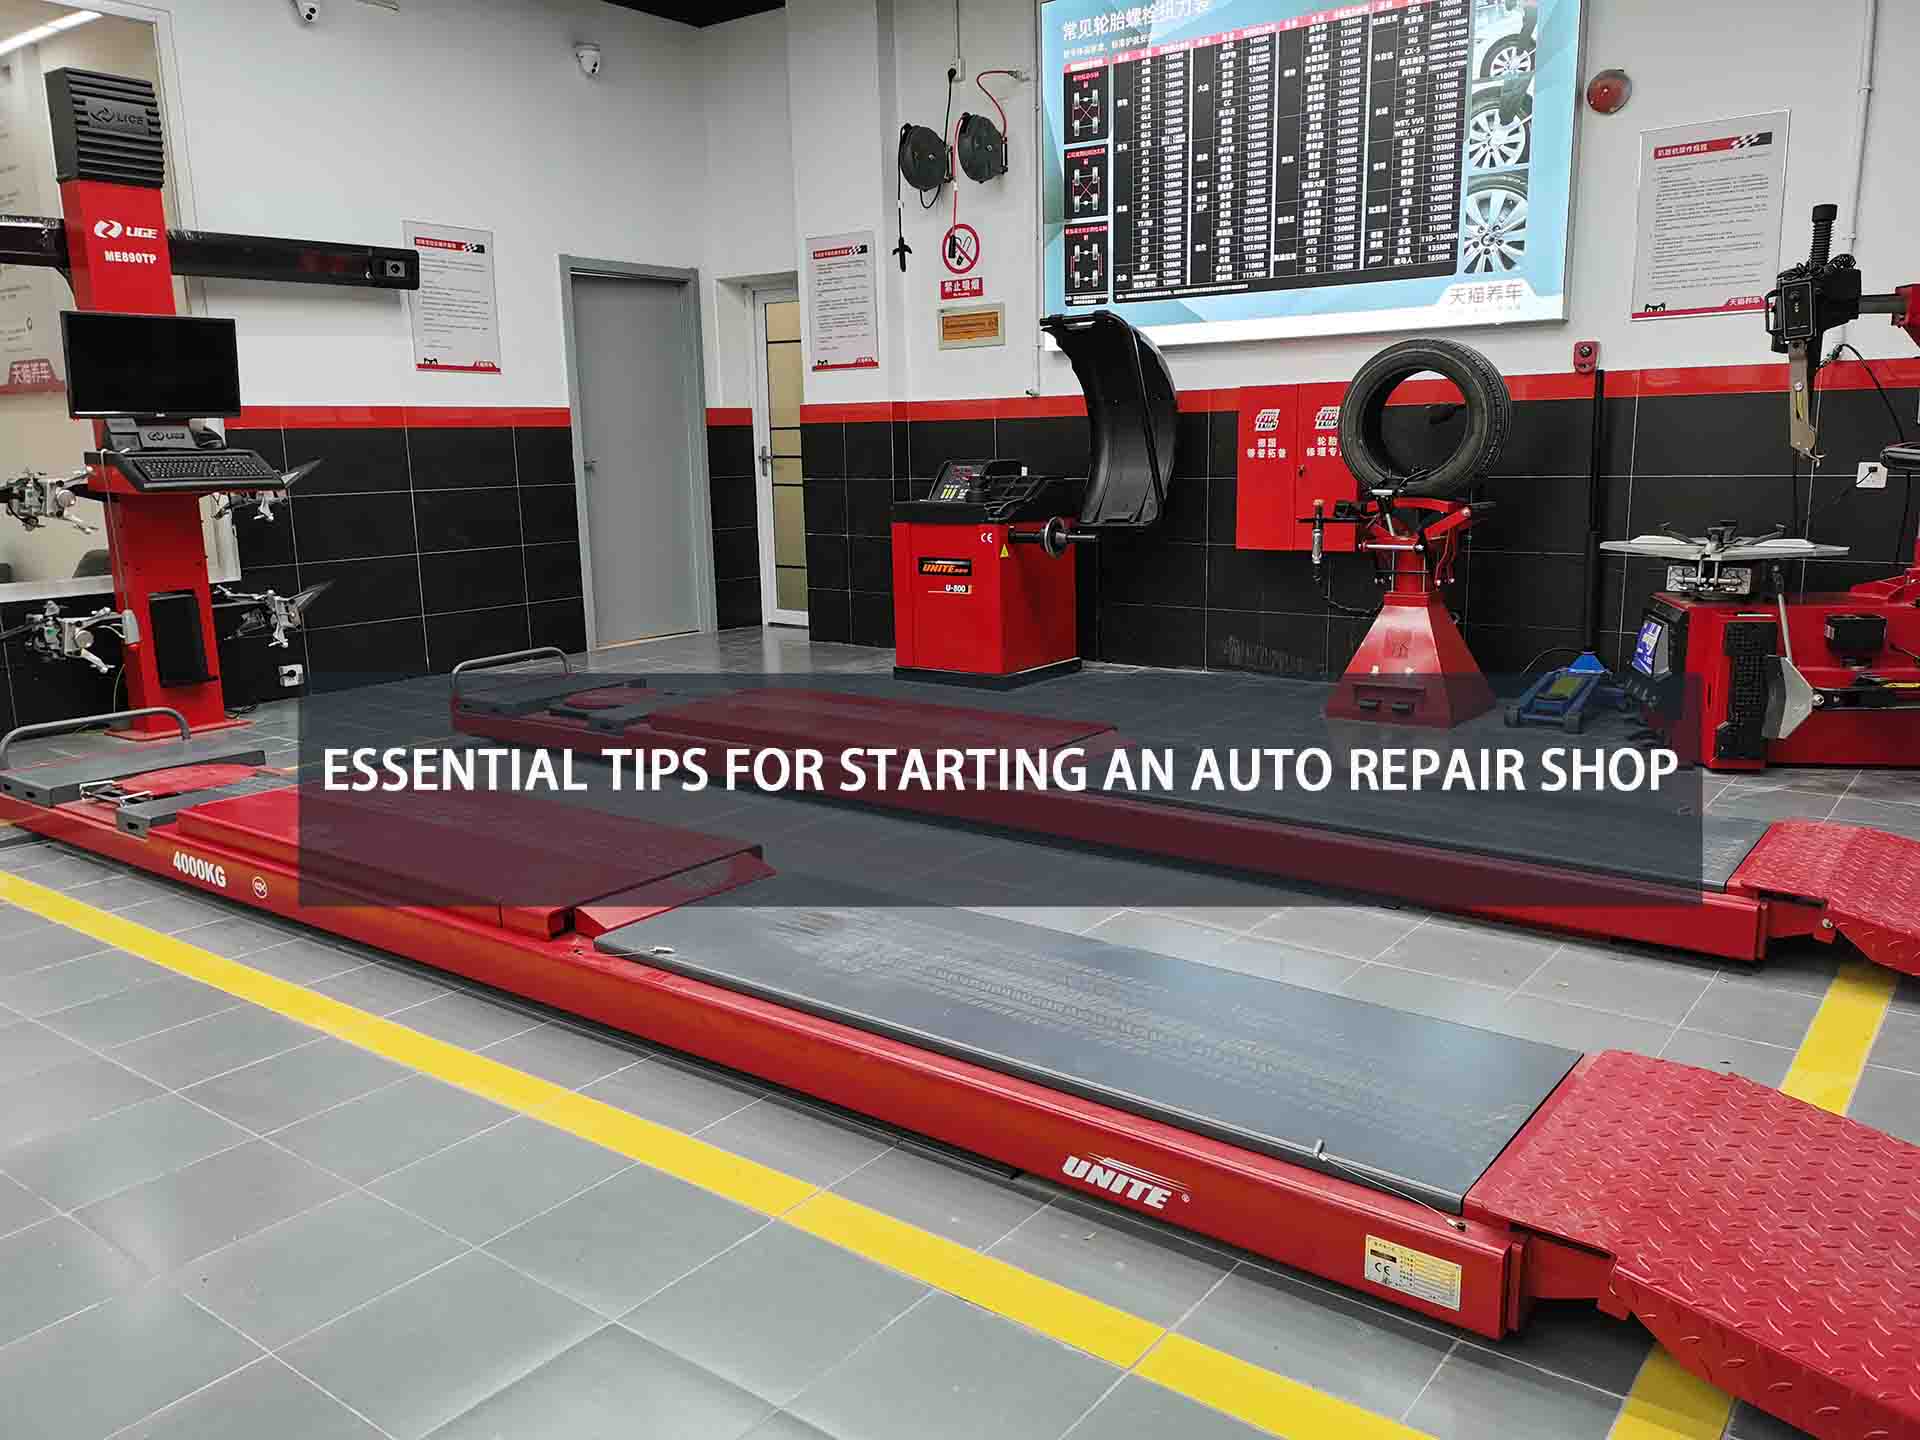 Essential Tips for Starting an Auto Repair Shop